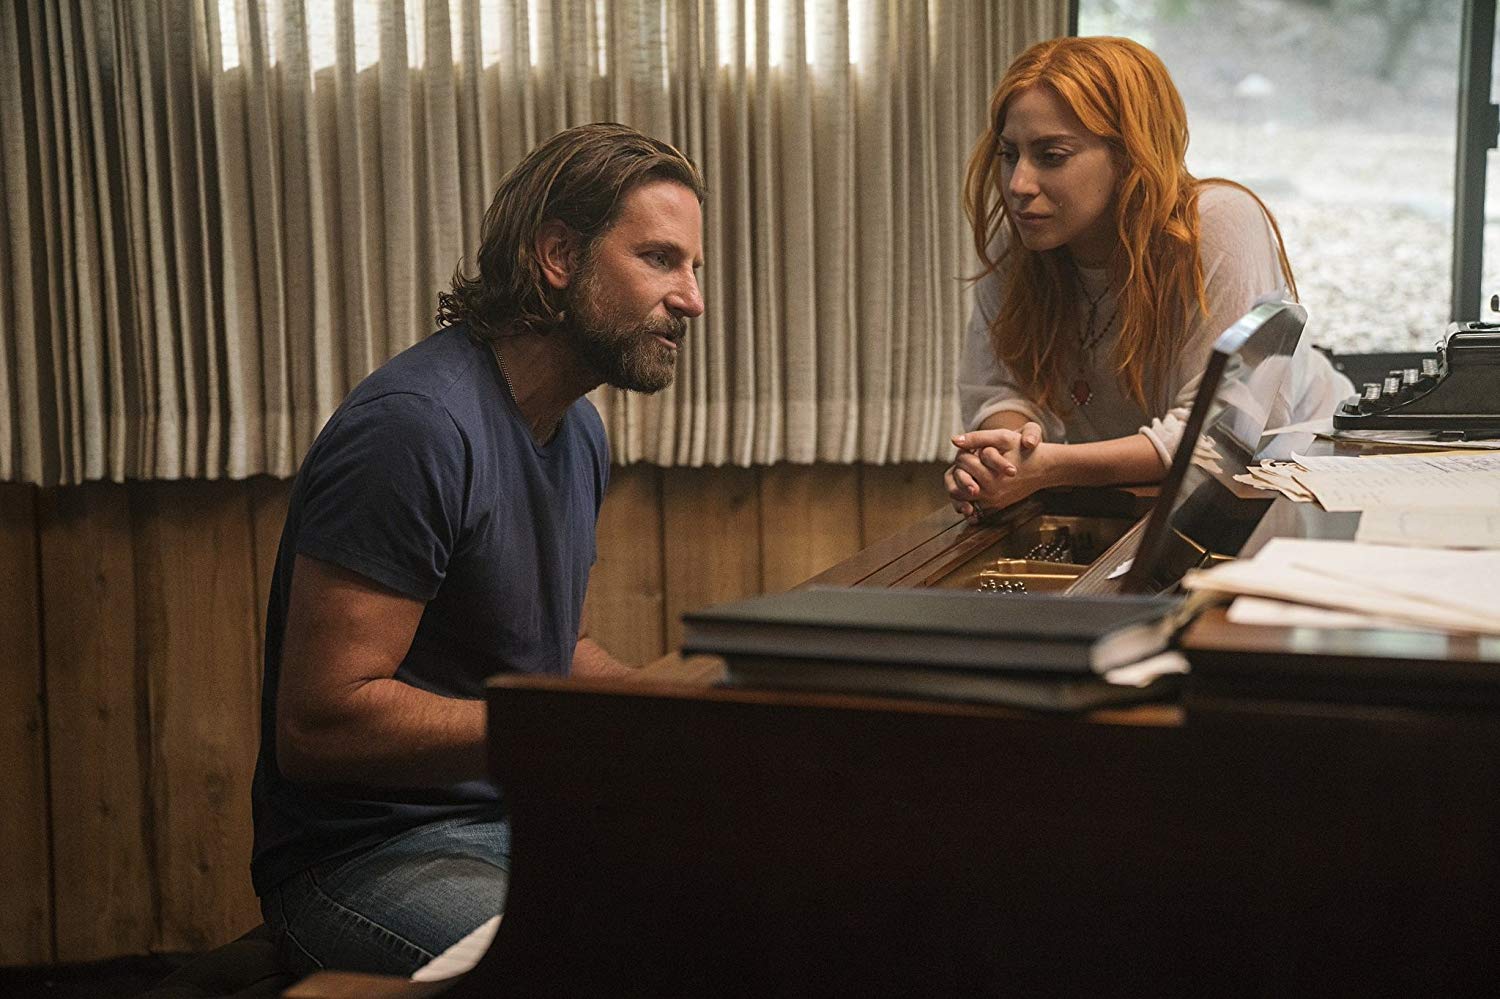 A Star is Born' has scenes filmed on Coachella, Stagecoach stages